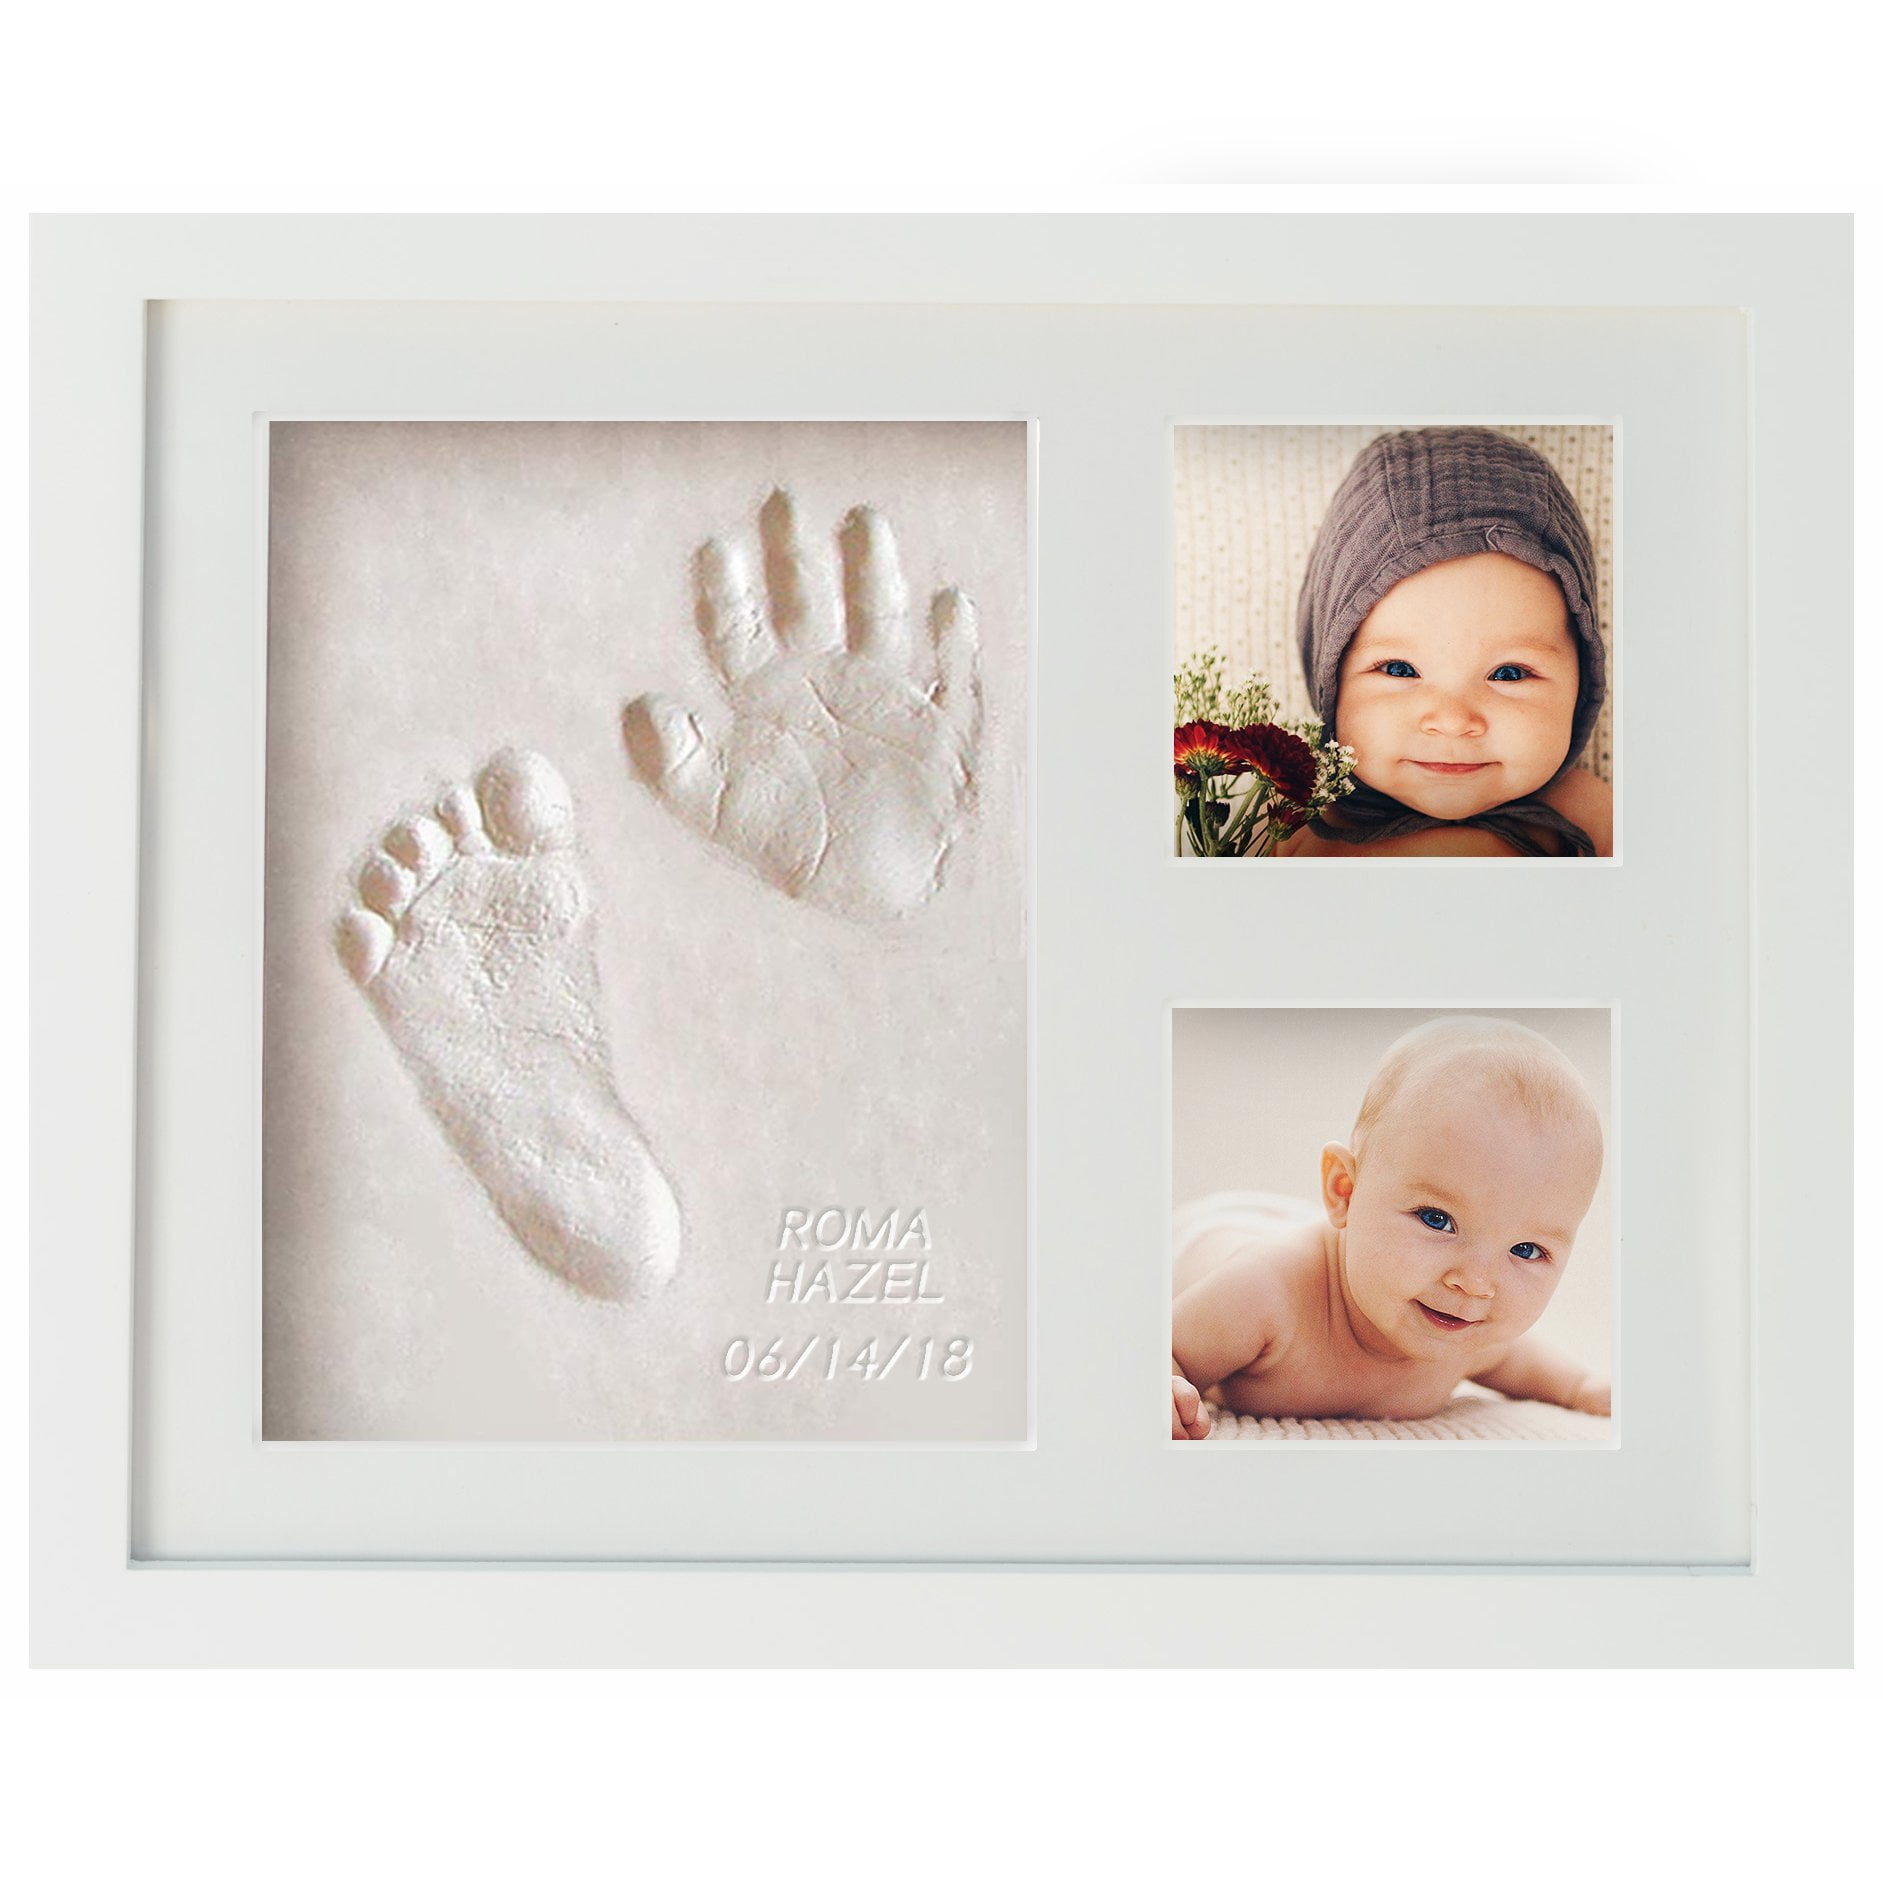 7.5"H FIRST Hand and foot PRINTS Porcelain Boy FRAME 